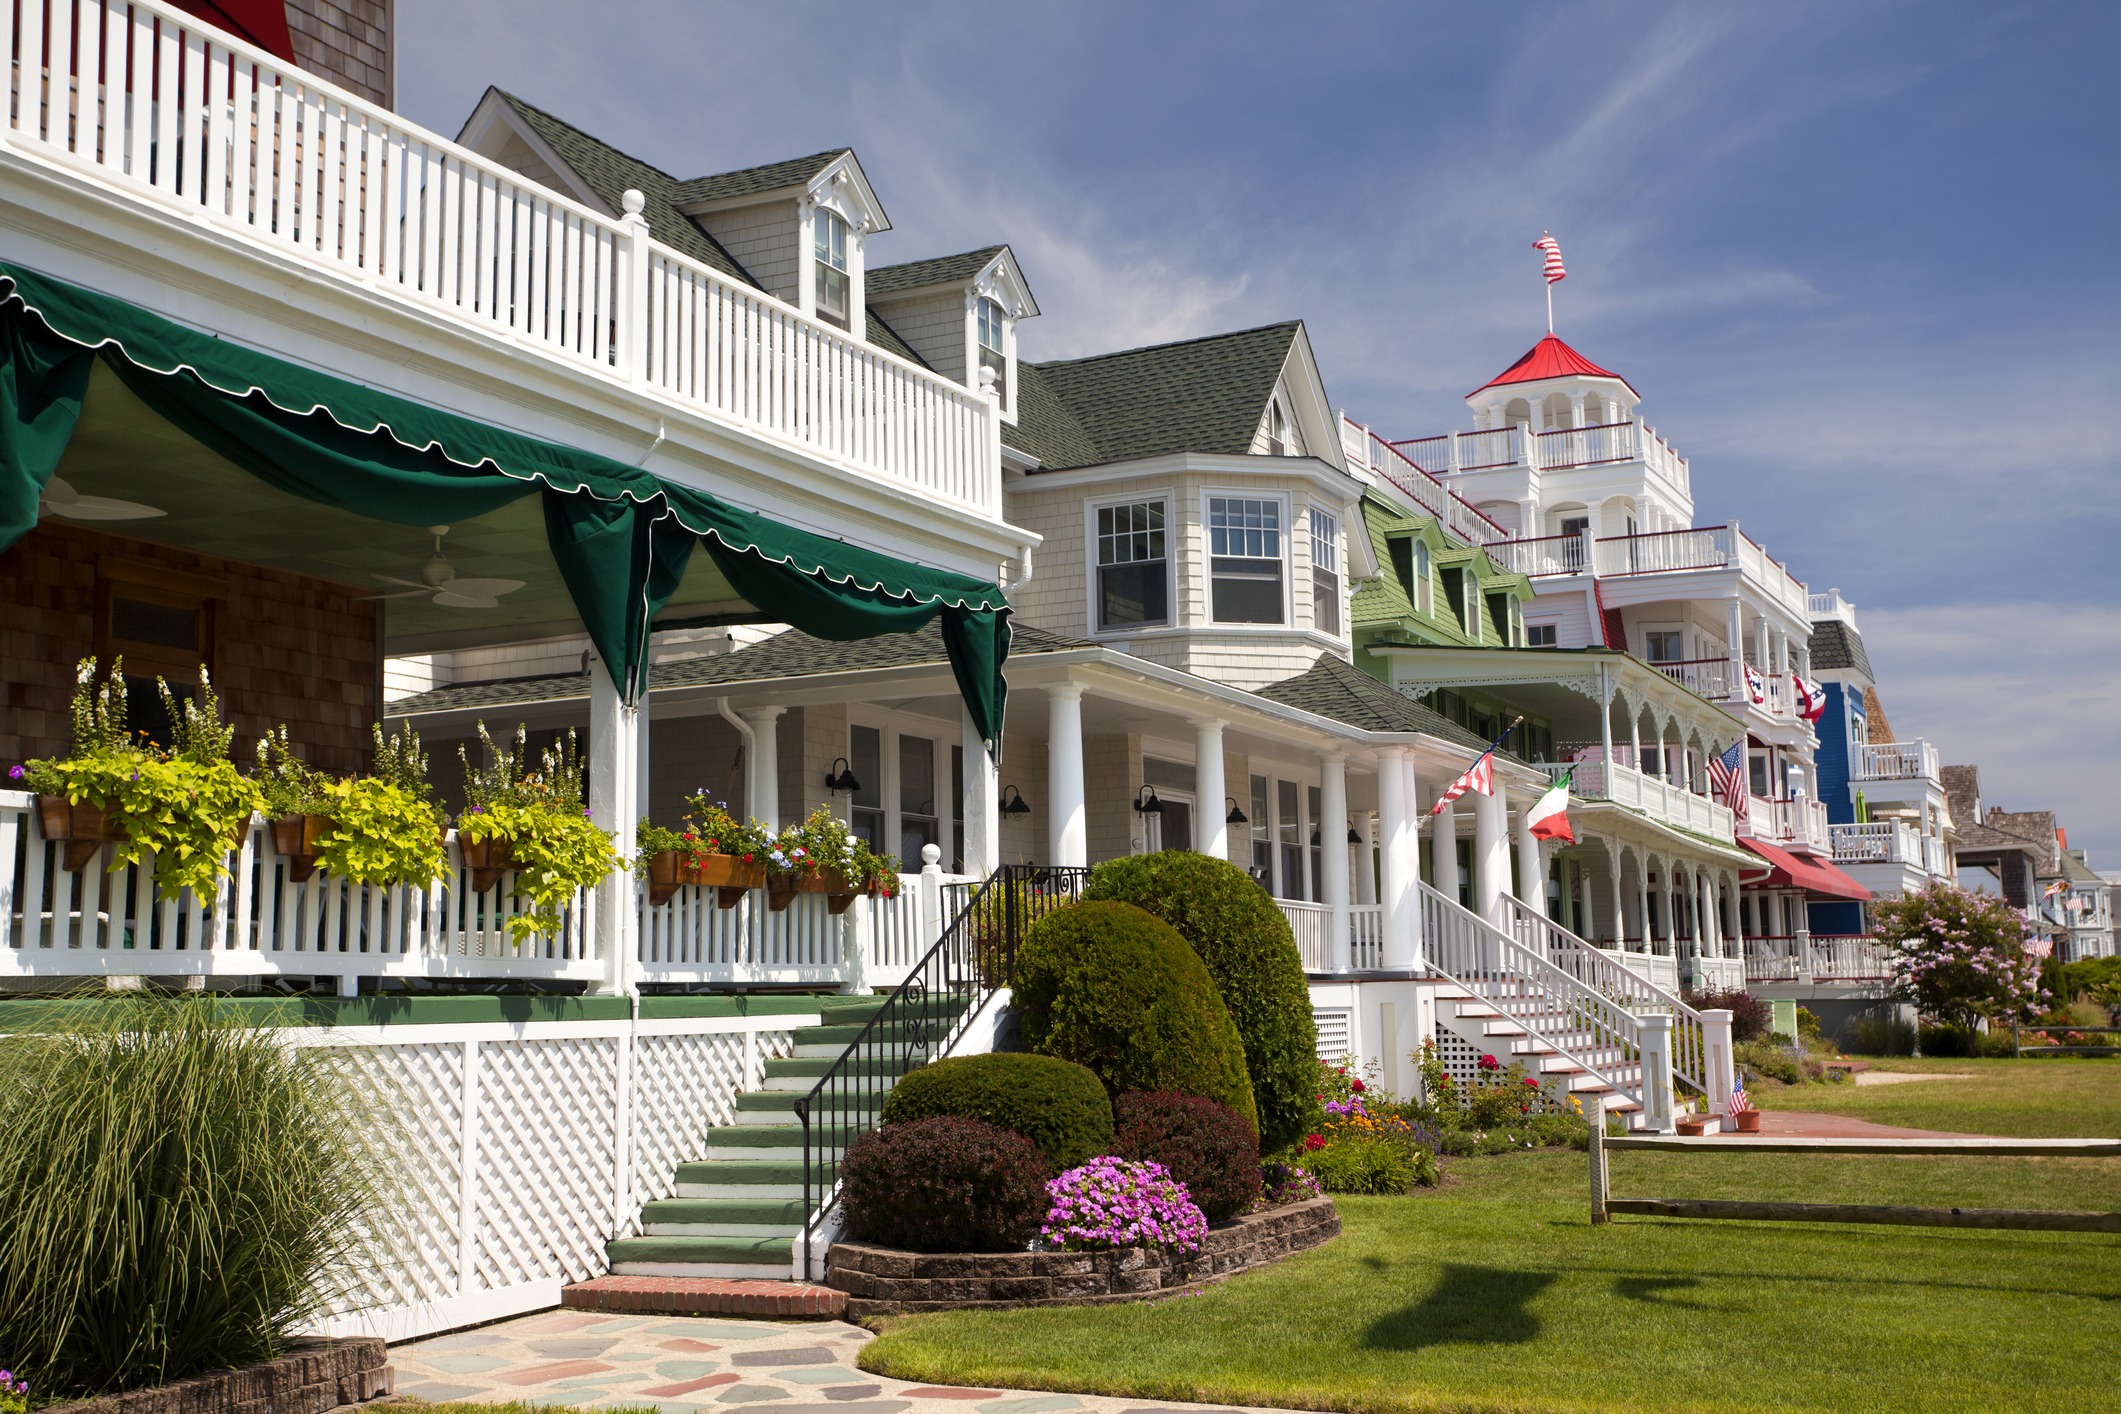 image of weekend in cape may, Victorian houses